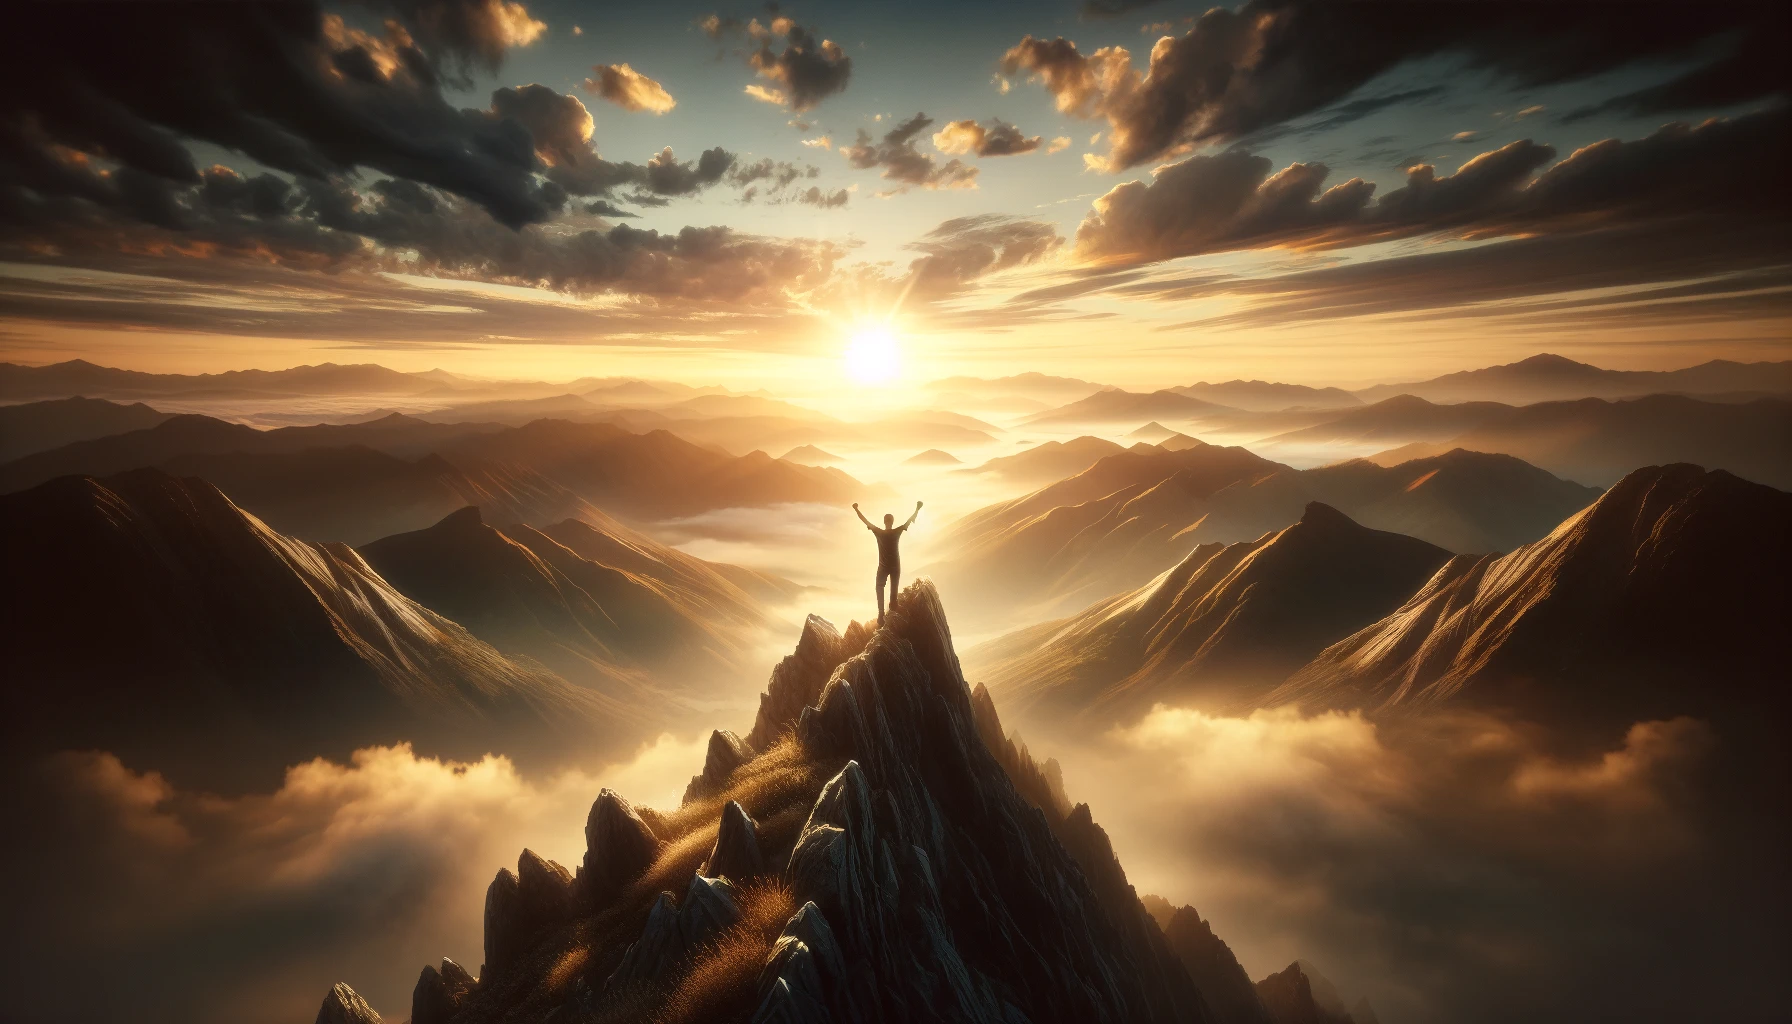 Create an image that symbolizes success in recovery from addiction. Visualize a mountain peak at dawn, with a single person standing at the summit, ar